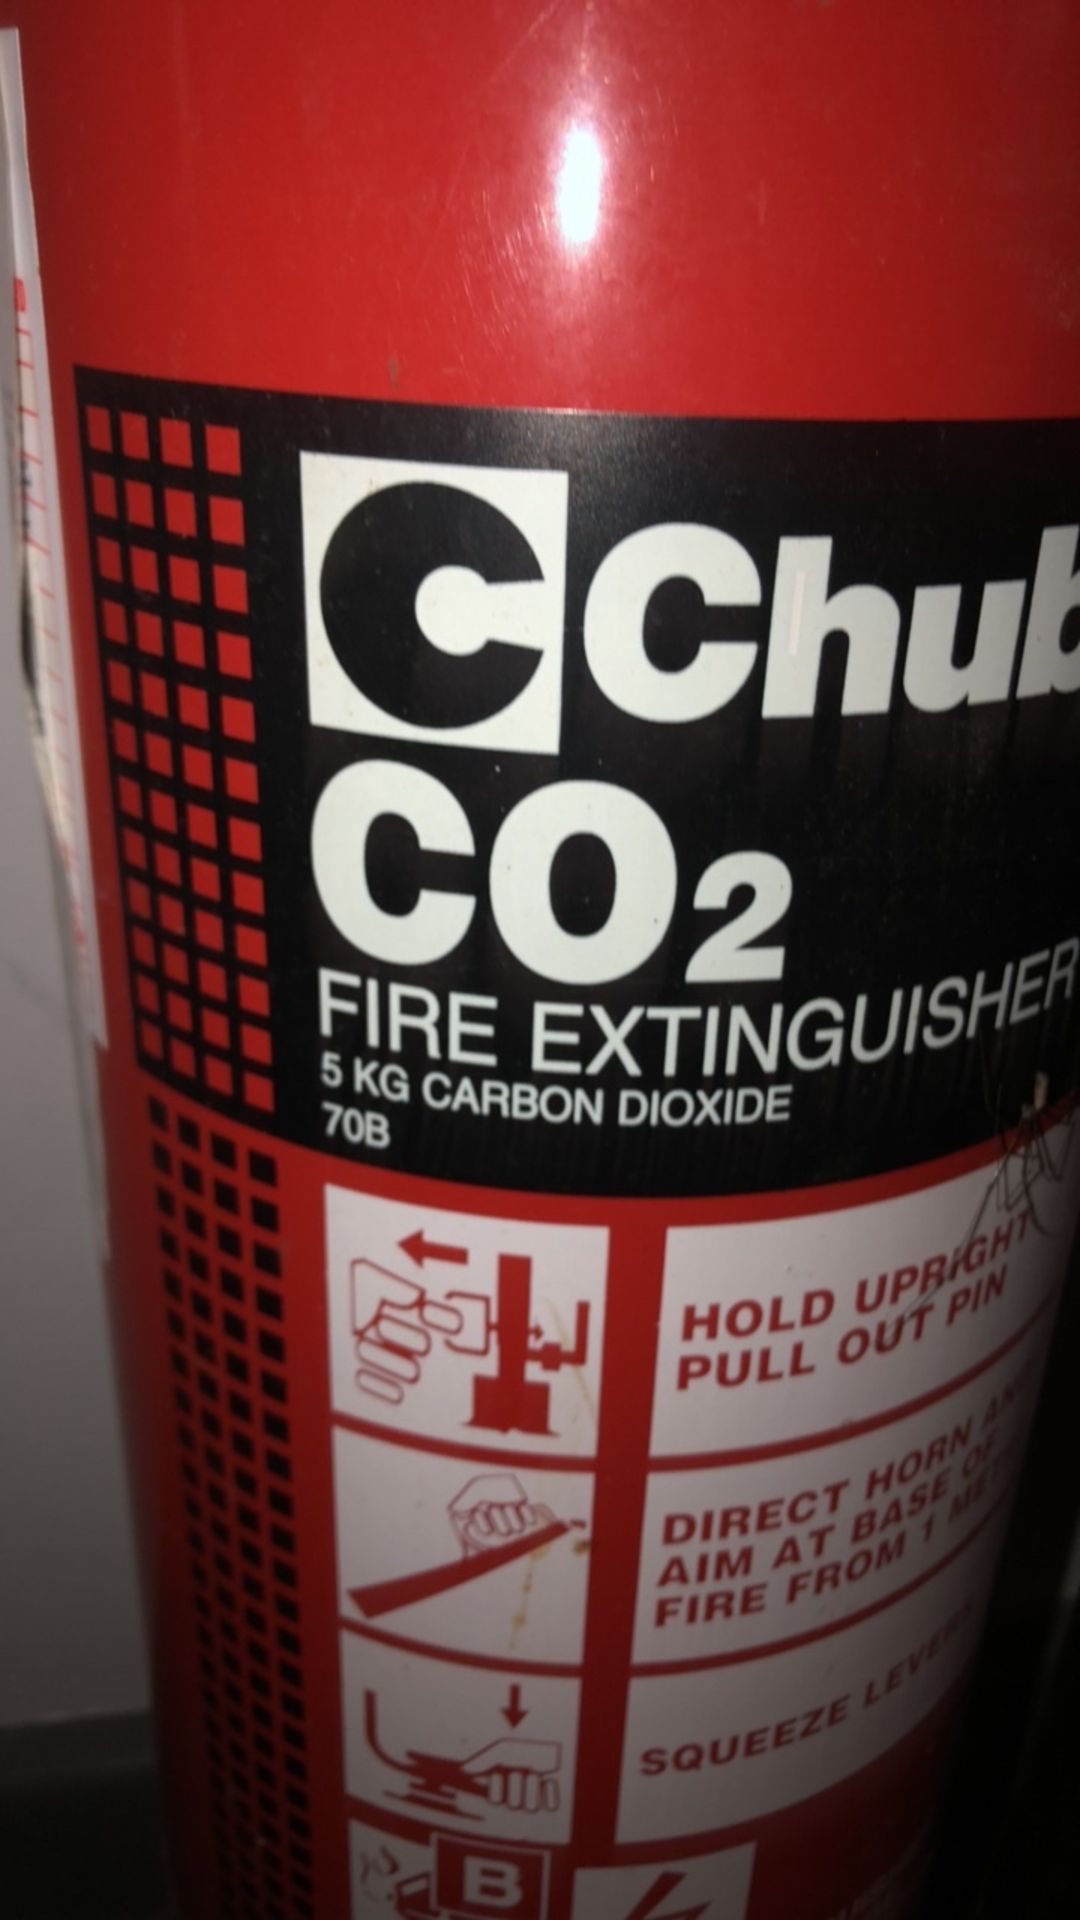 Fire extinguisher CO2 - Image 3 of 4